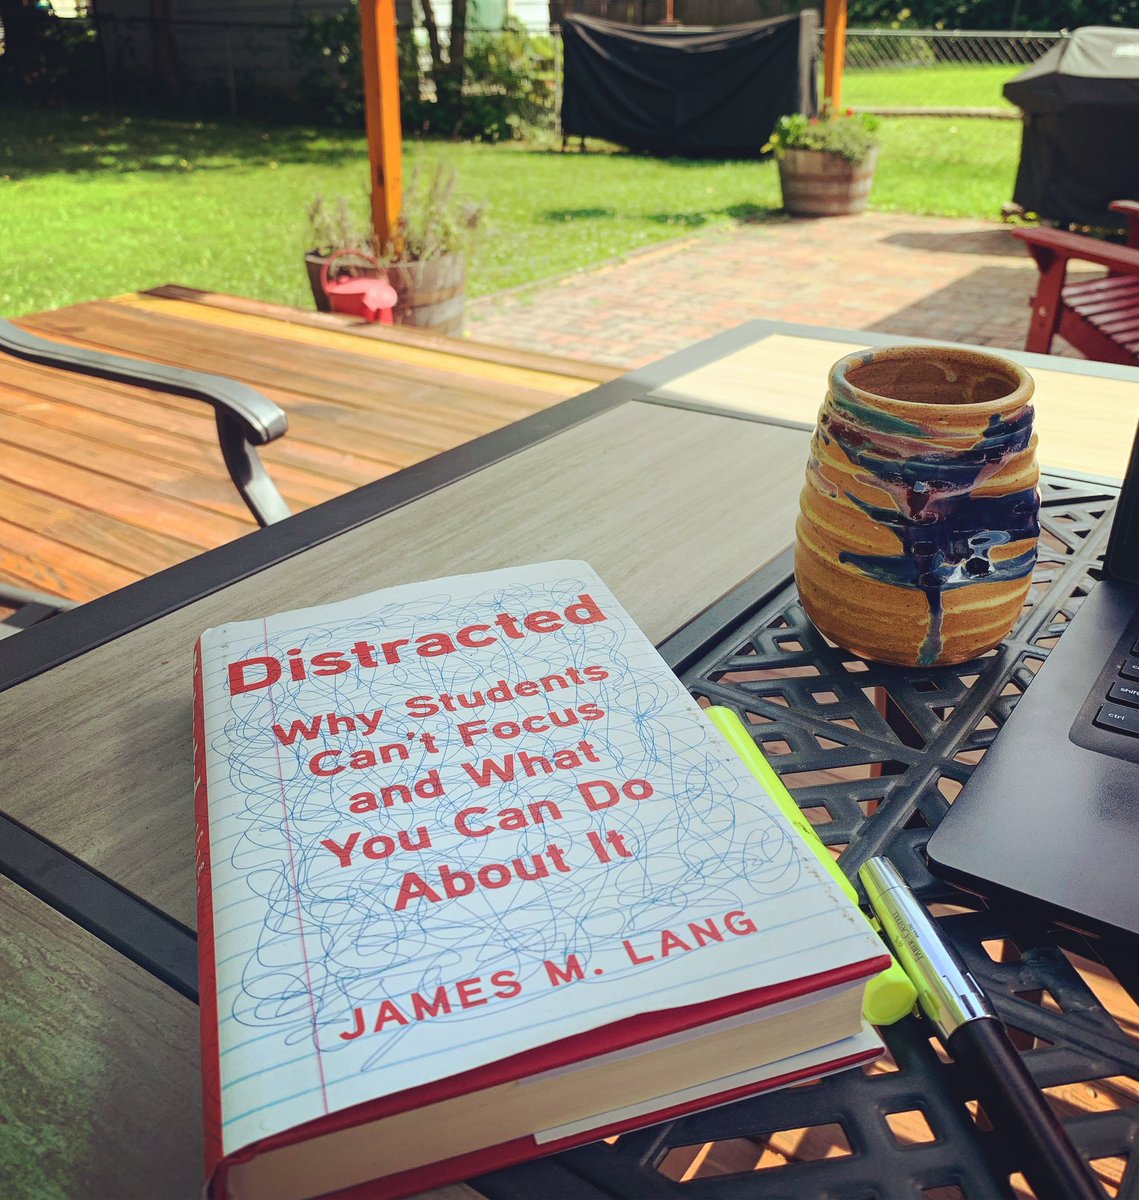 Looking forward to facilitating our @gouchercollege Faculty summer book group starting next week. This year we are reading “Distracted: Why Students Can’t Focus and What You Can Do About It” by the always excellent @LangOnCourse